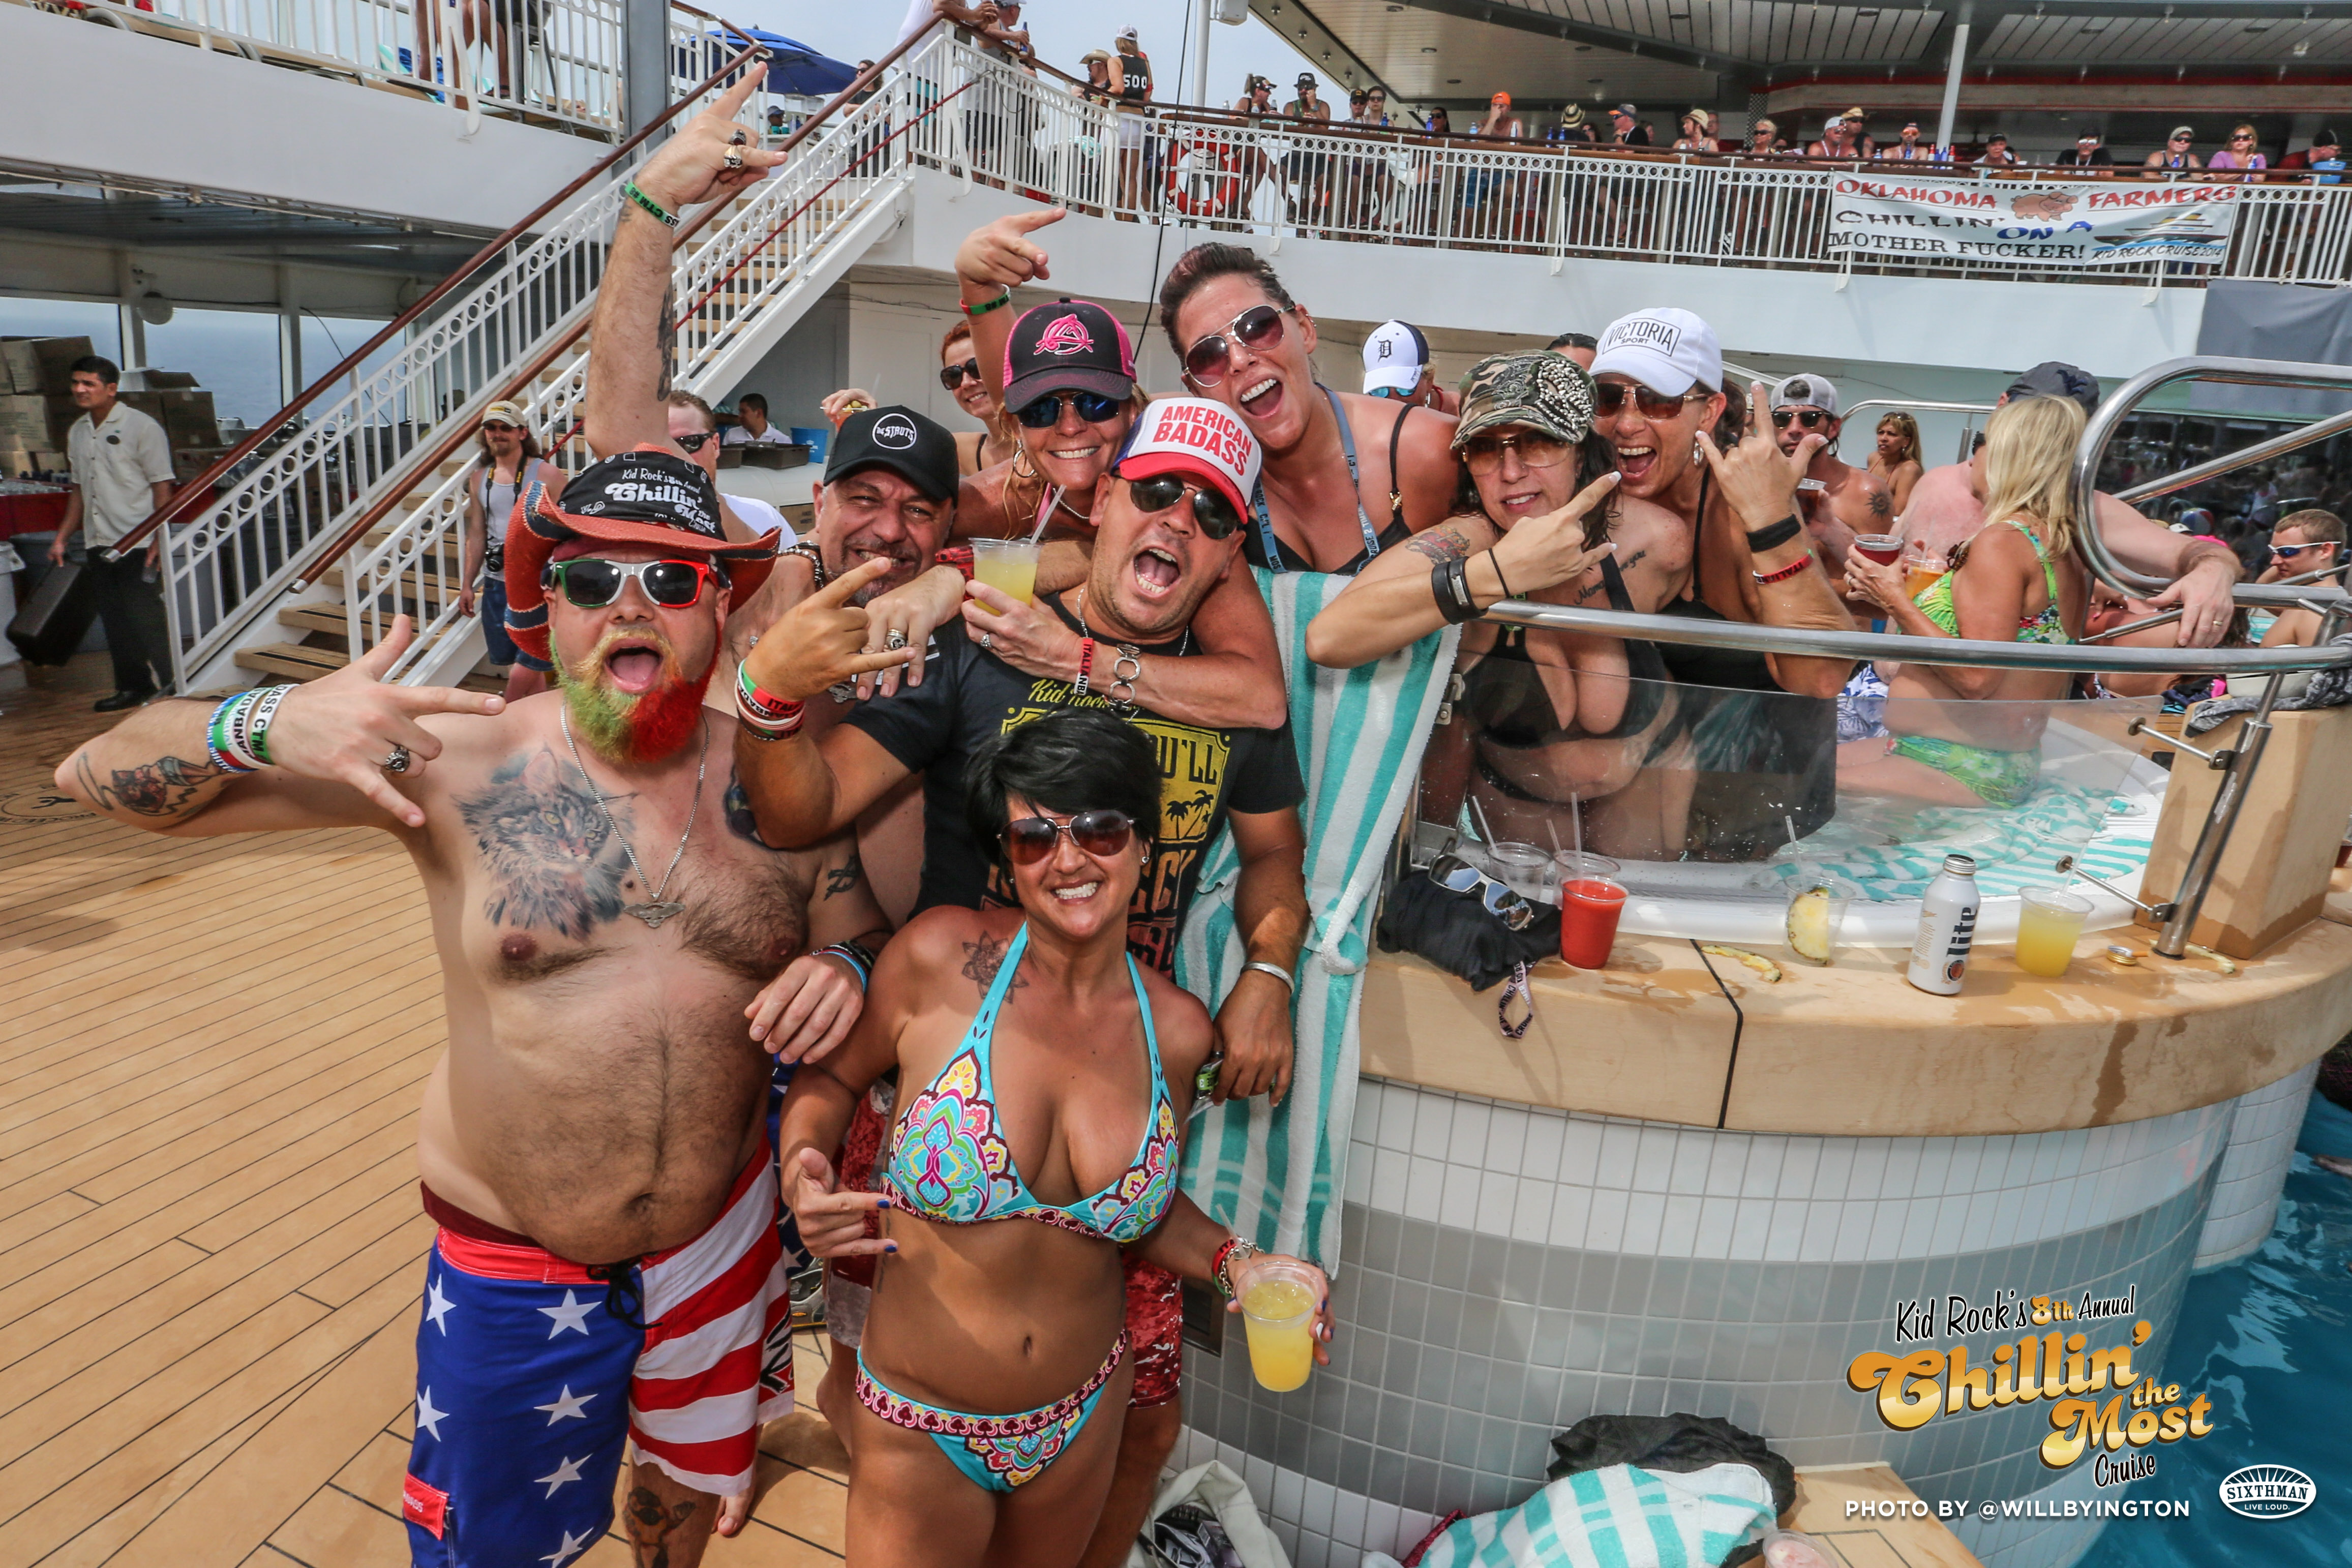 My Liberal Ass Spent 5 Nights on Kid Rocks Chillin the Most Cruise pic